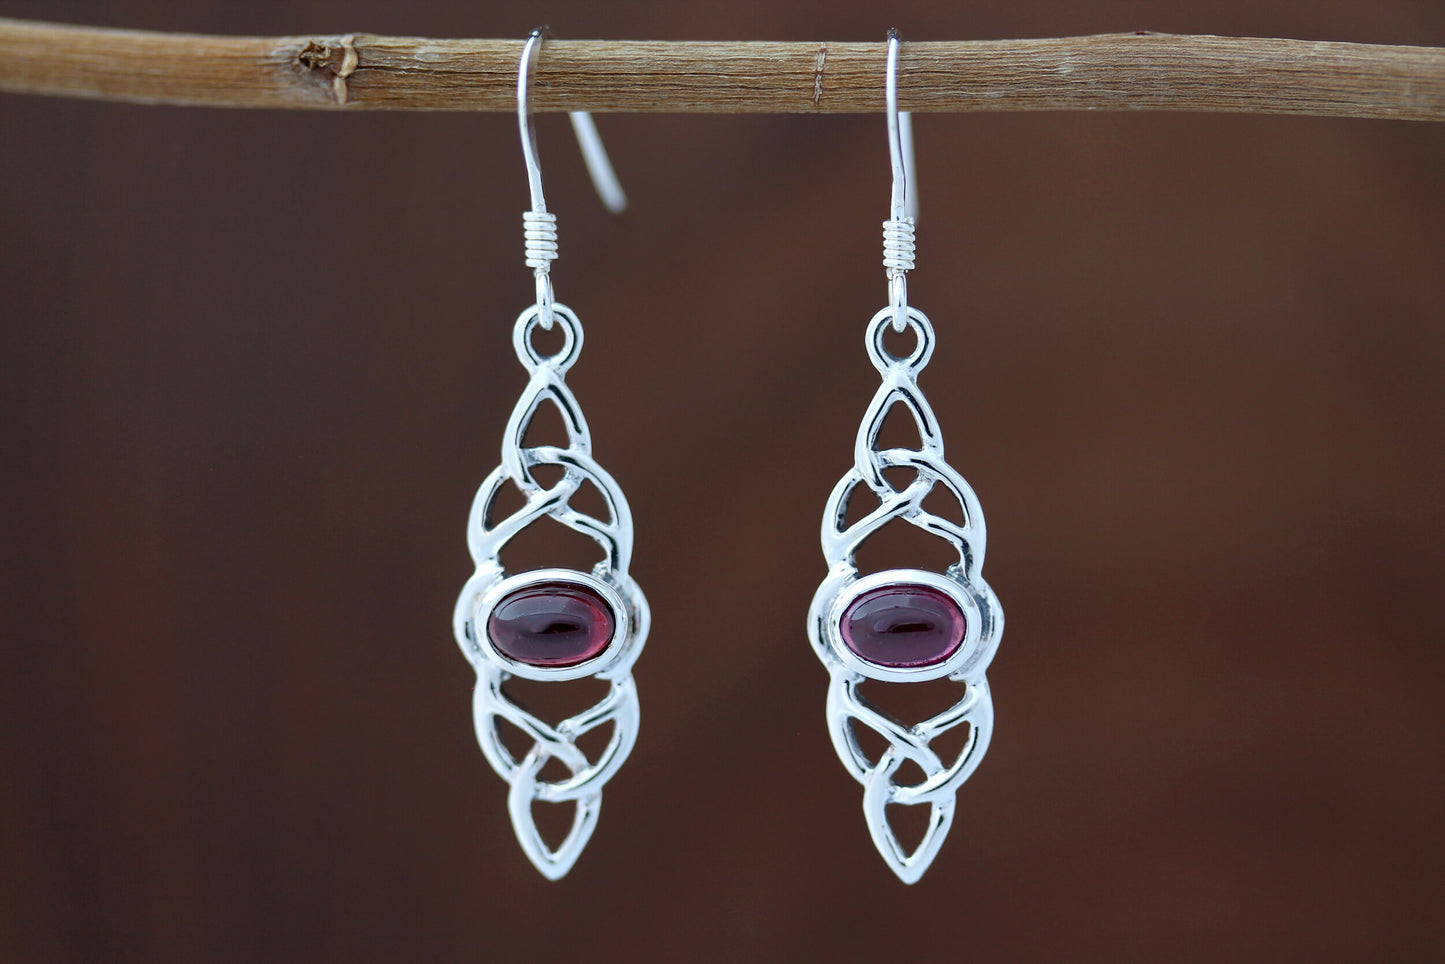 Triquetra Earrings - Double Trinity with Red Garnet Centre